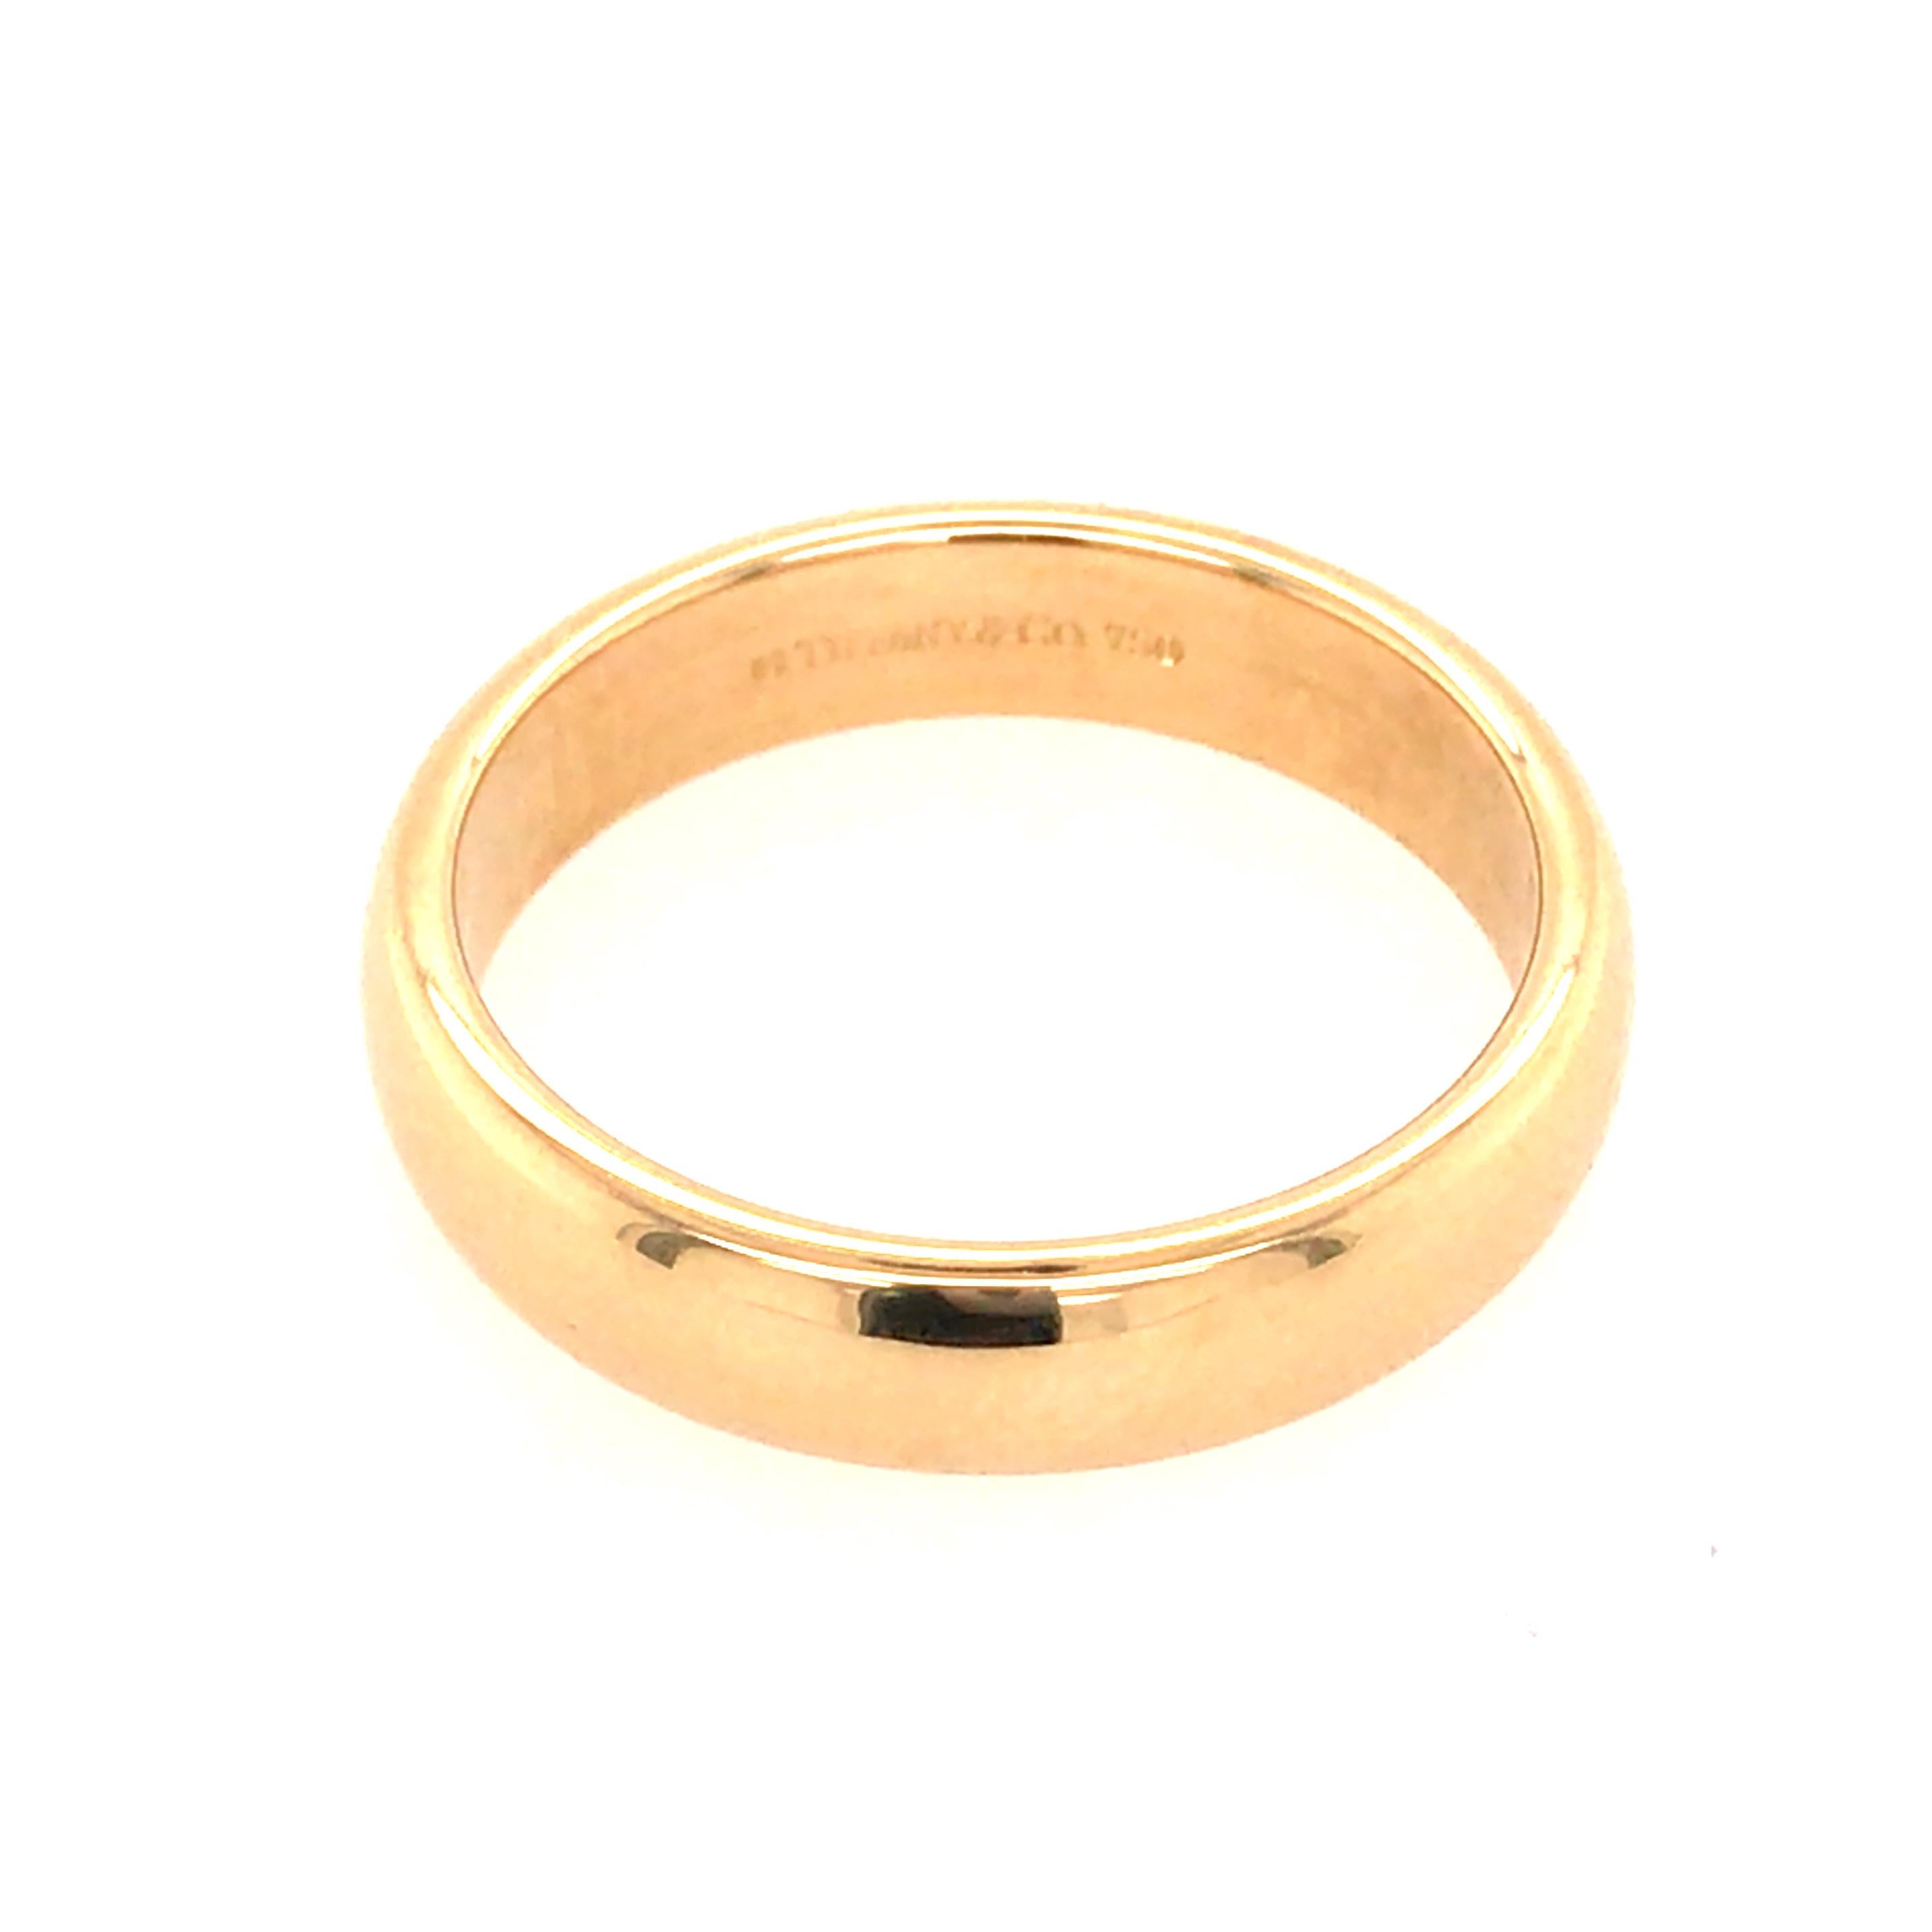 Tiffany & Co.  Wedding Band in 18K Yellow Gold.  The Band measures 3/16 in width and weighs 5.75 grams.  Ring size 7 1/4.  Stamped 